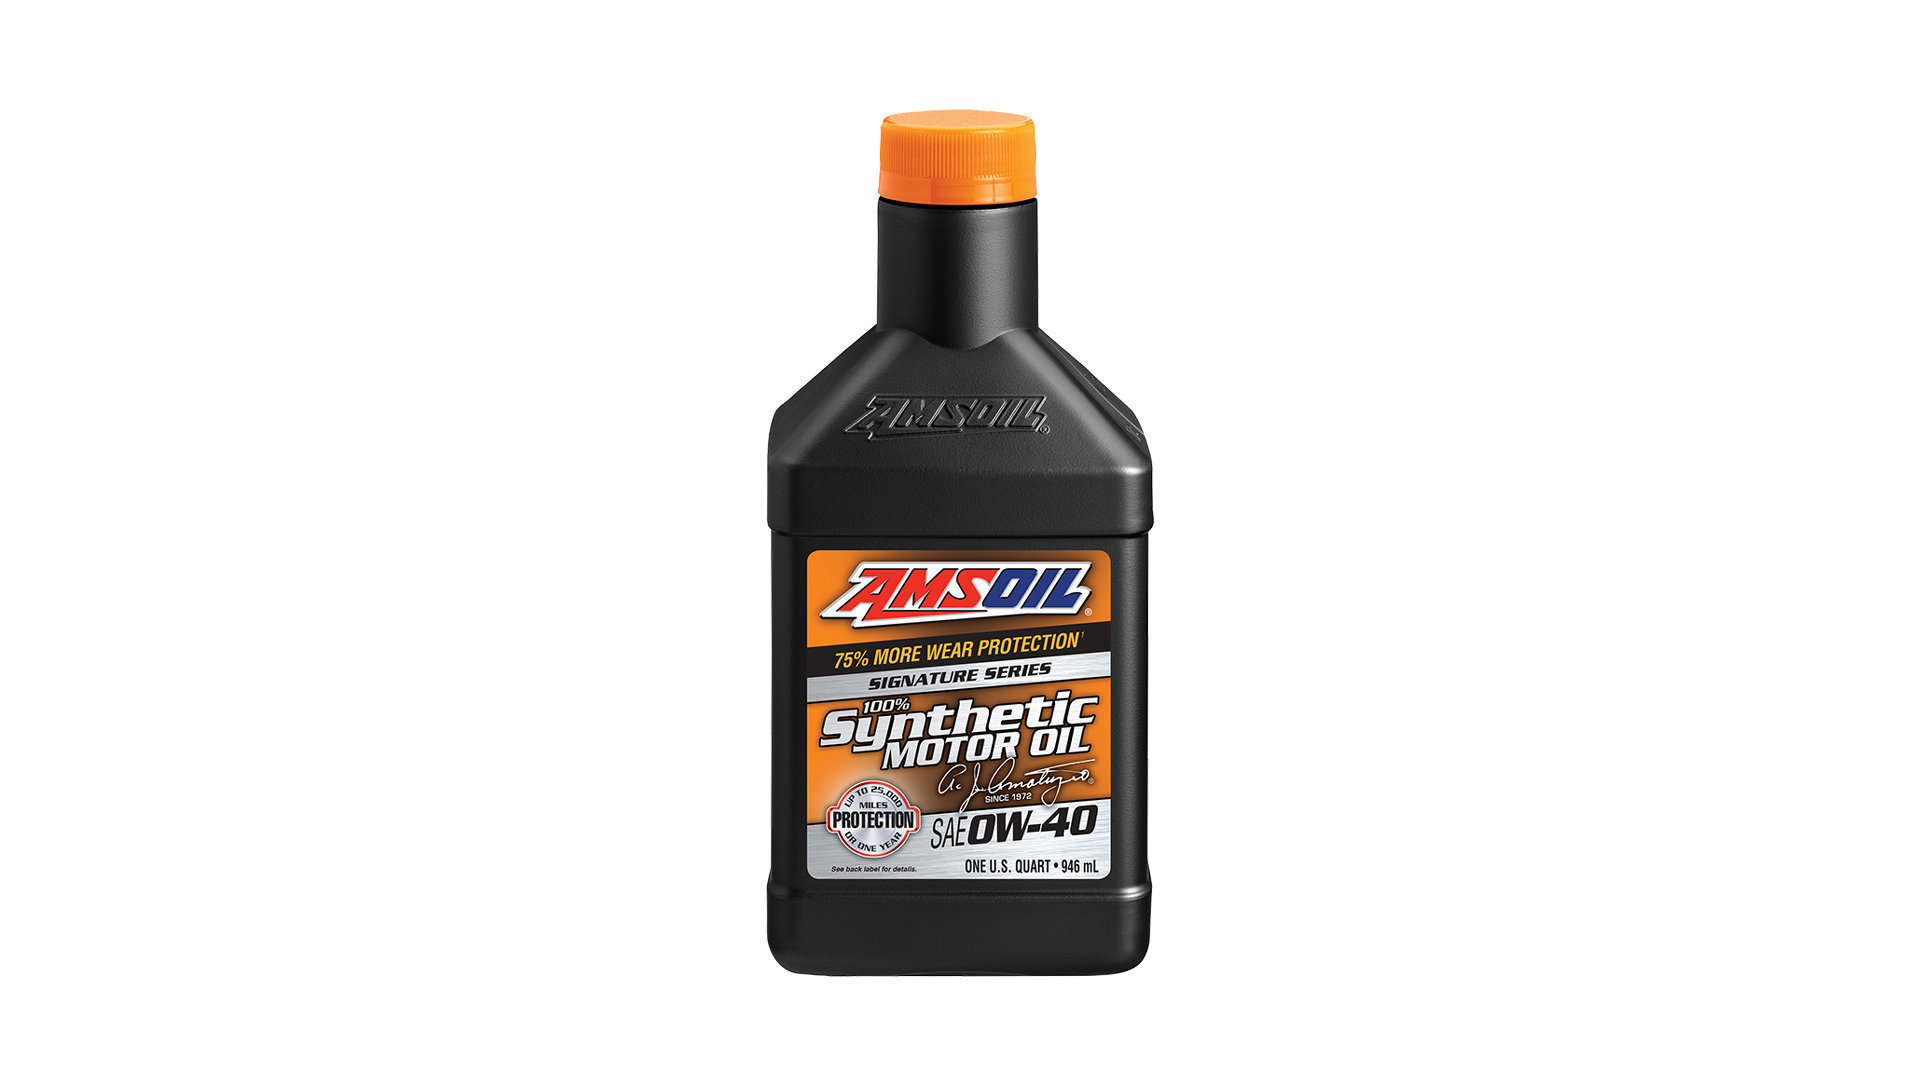 Amsoil signature series synthetic. Aмsoil SS 0-20. AMSOIL 5w20 артикул. AMSOIL 5w30. Моторное масло AMSOIL Signature Series Synthetic Motor Oil 0w-40 0.946 л.